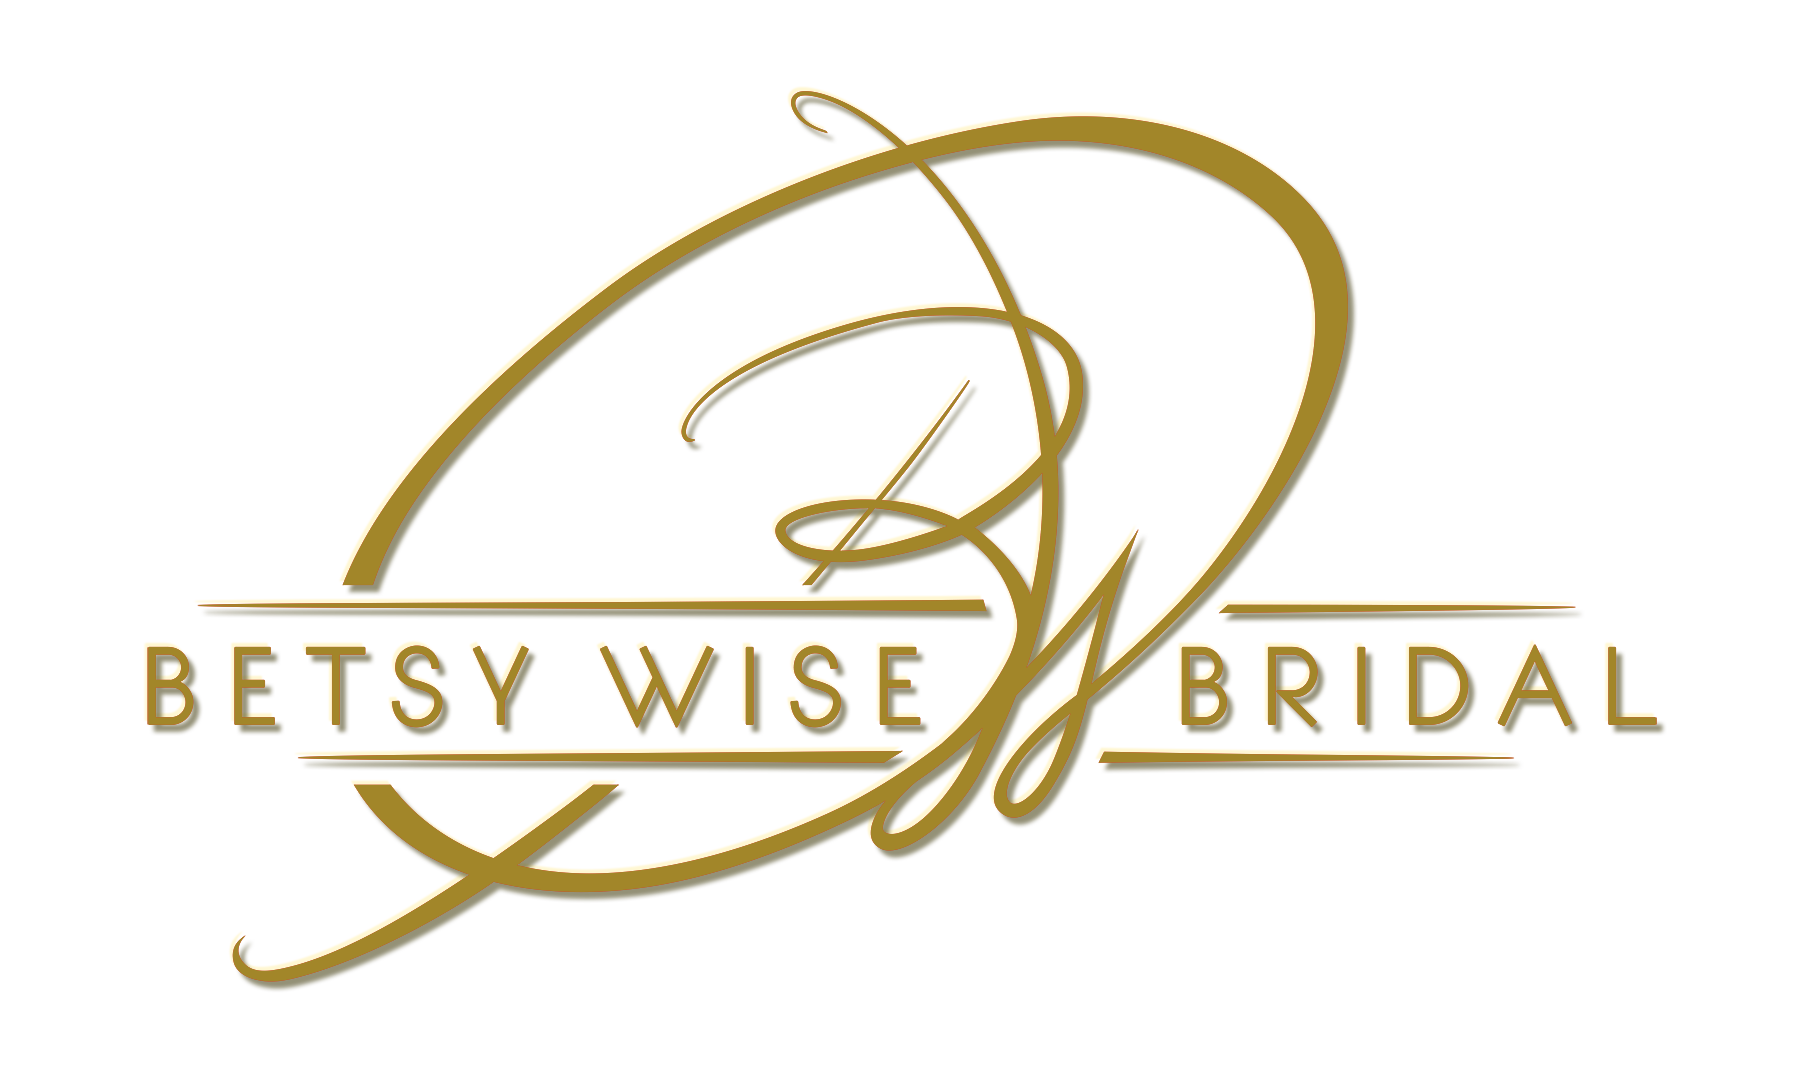 Betsy Wise Bridal